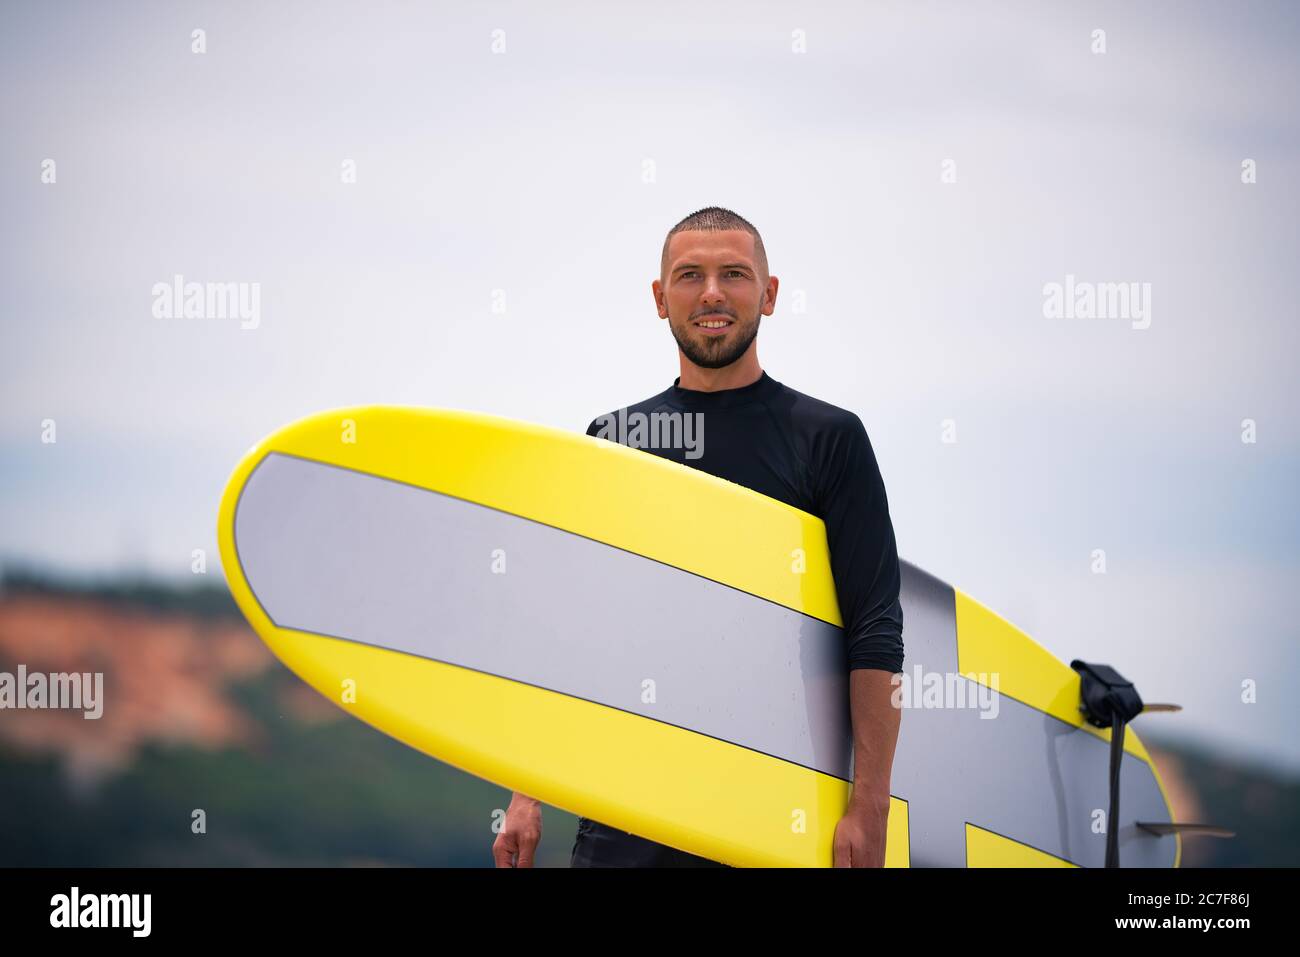 Surfer smiling, looking forward and holding surfboard on a sunny summer day. Stock Photo